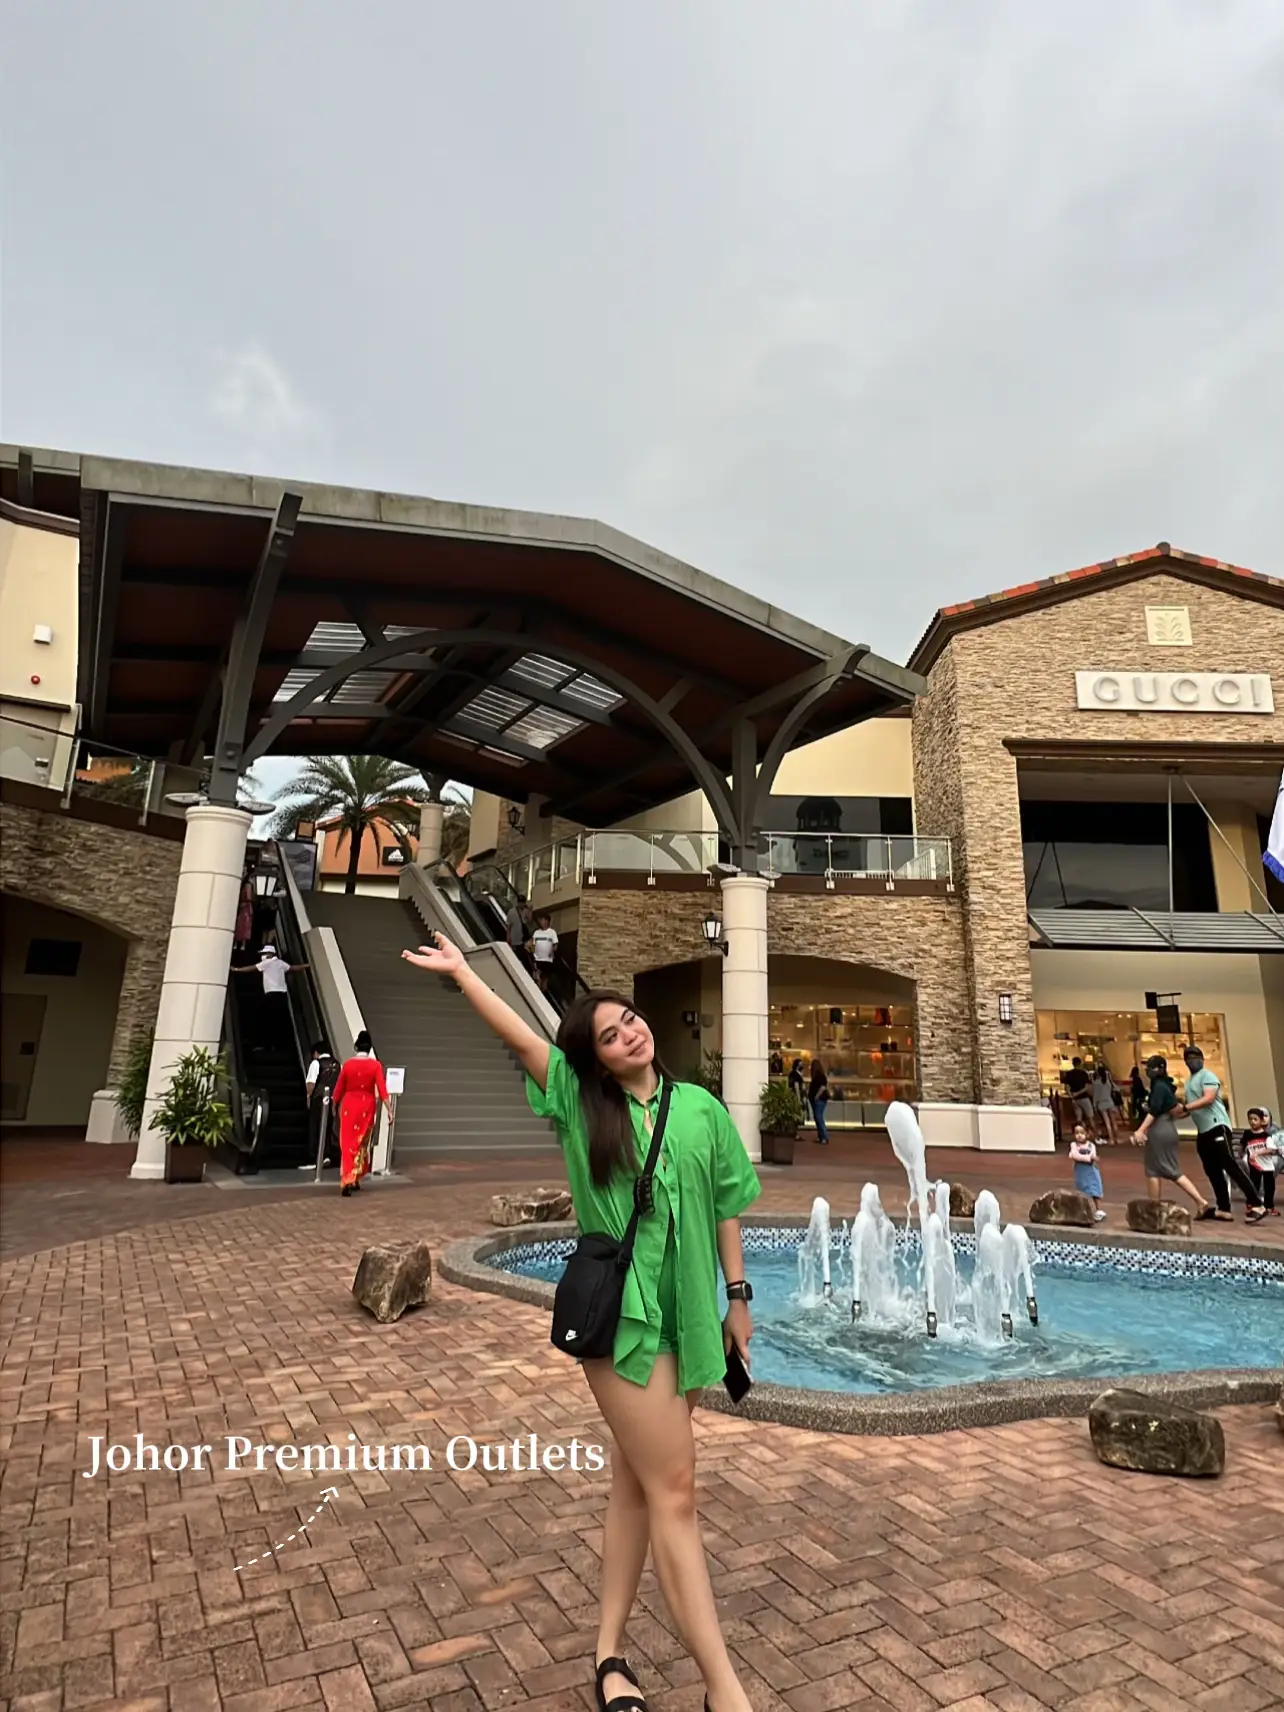 Johor Premium Outlets, Nike, Gallery posted by paaulagrace